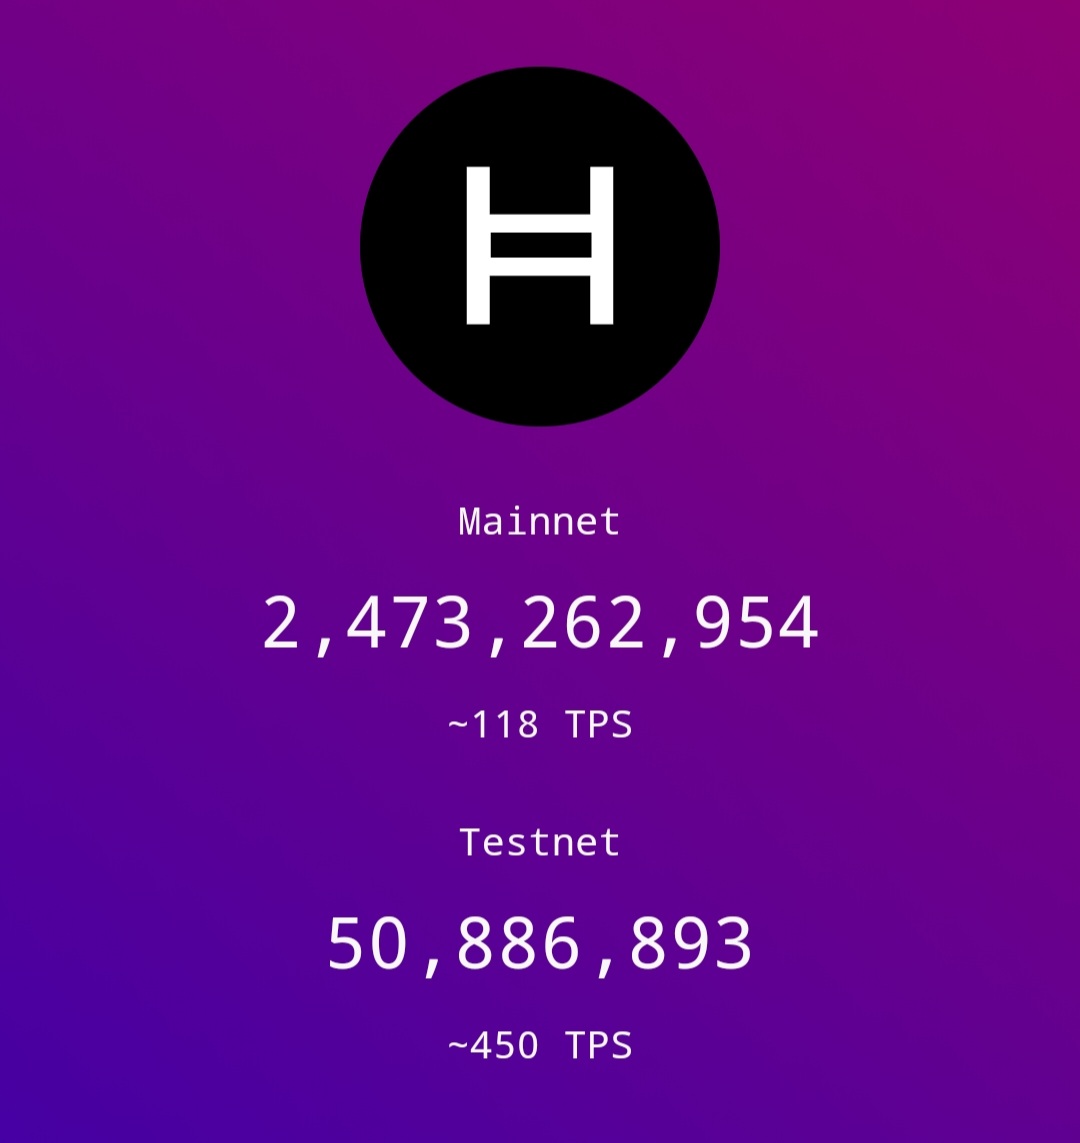 So many enterprise use cases are about to go live on #Hedera & what we are about to witness is going to be historic for crypto 🚀 Hedera is going to disrupt every single industry in the world by bringing true value to many people, businesses, organizations & governments. $HBAR